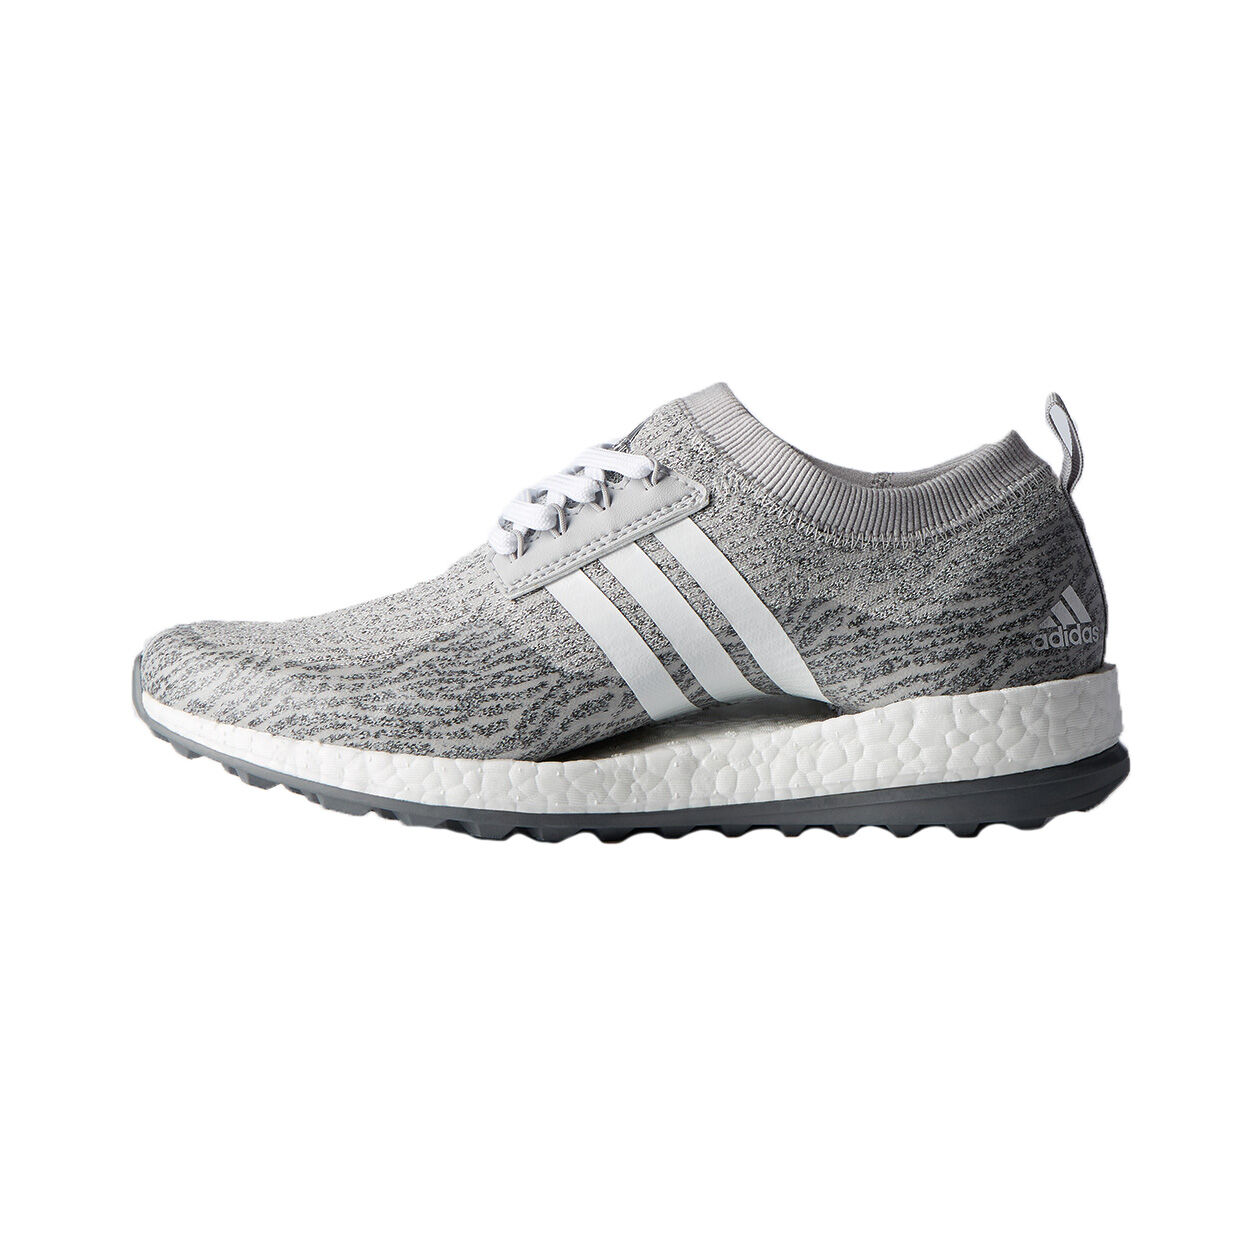 adidas boost womens golf shoes